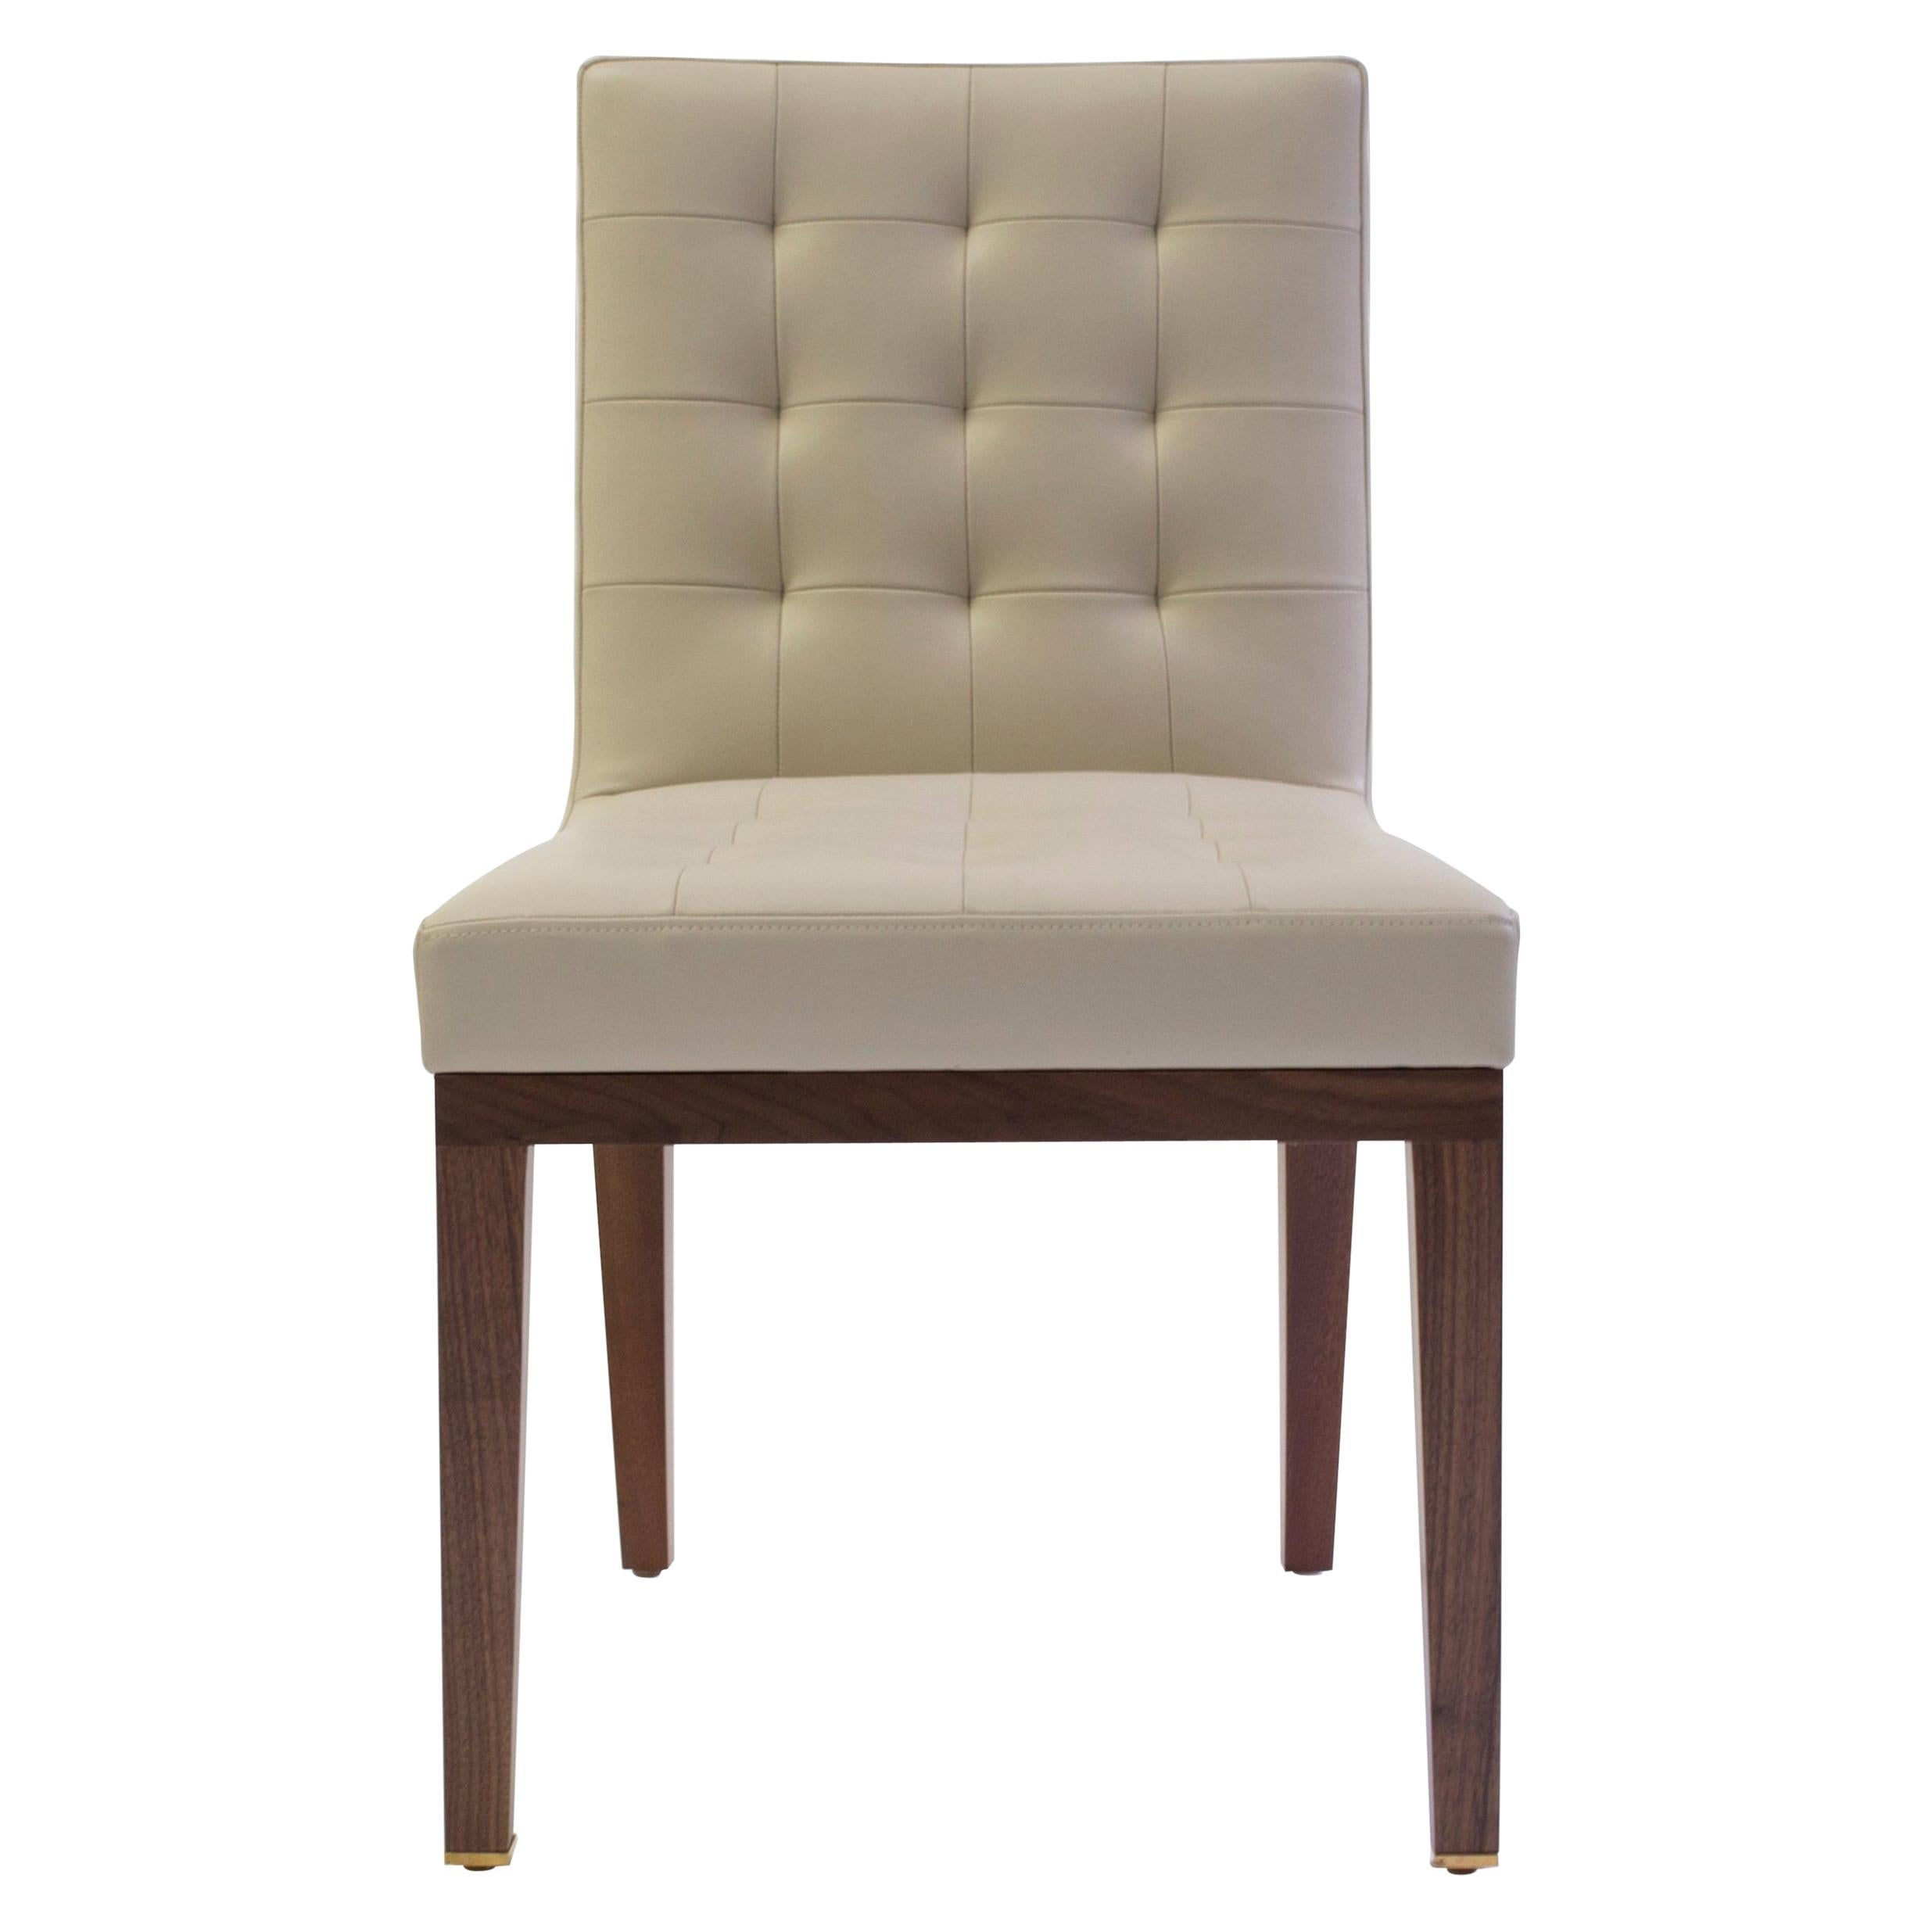 Tufted and Buttoned Side Chair Shown in Tan Leather with Medium Oakwood Legs For Sale